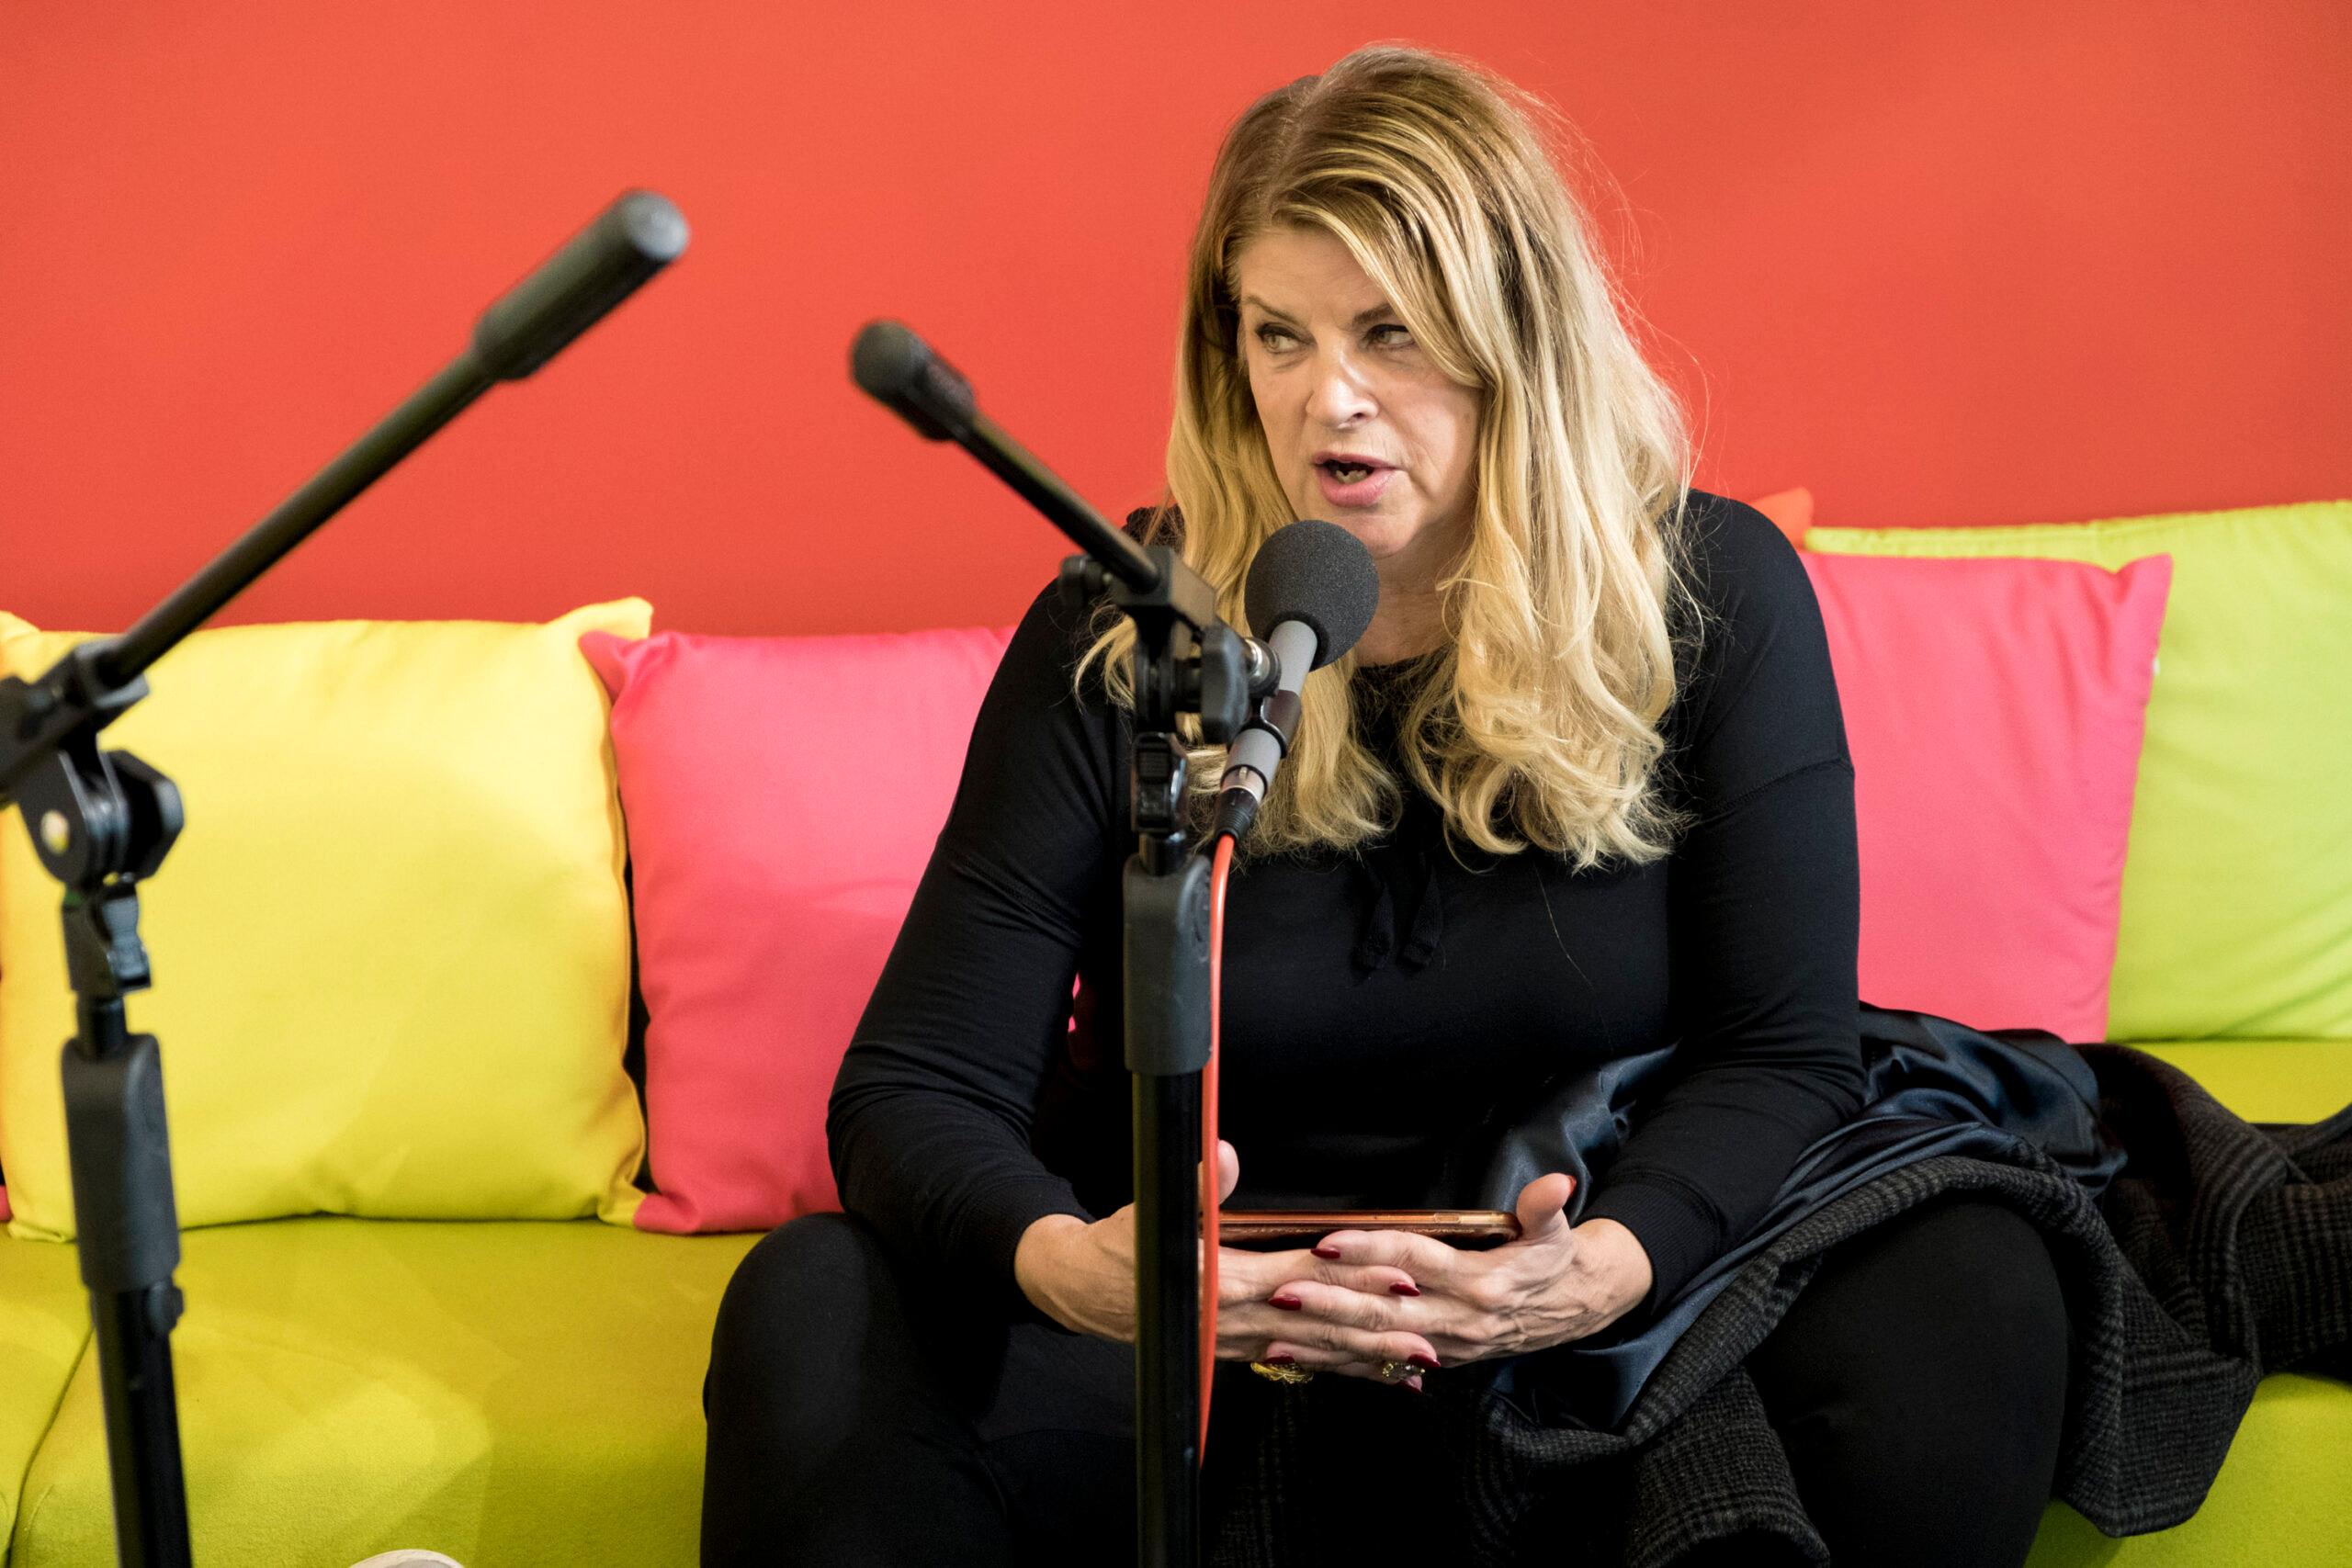 Kirstie Alley chats with Dan Wootton at The Sun